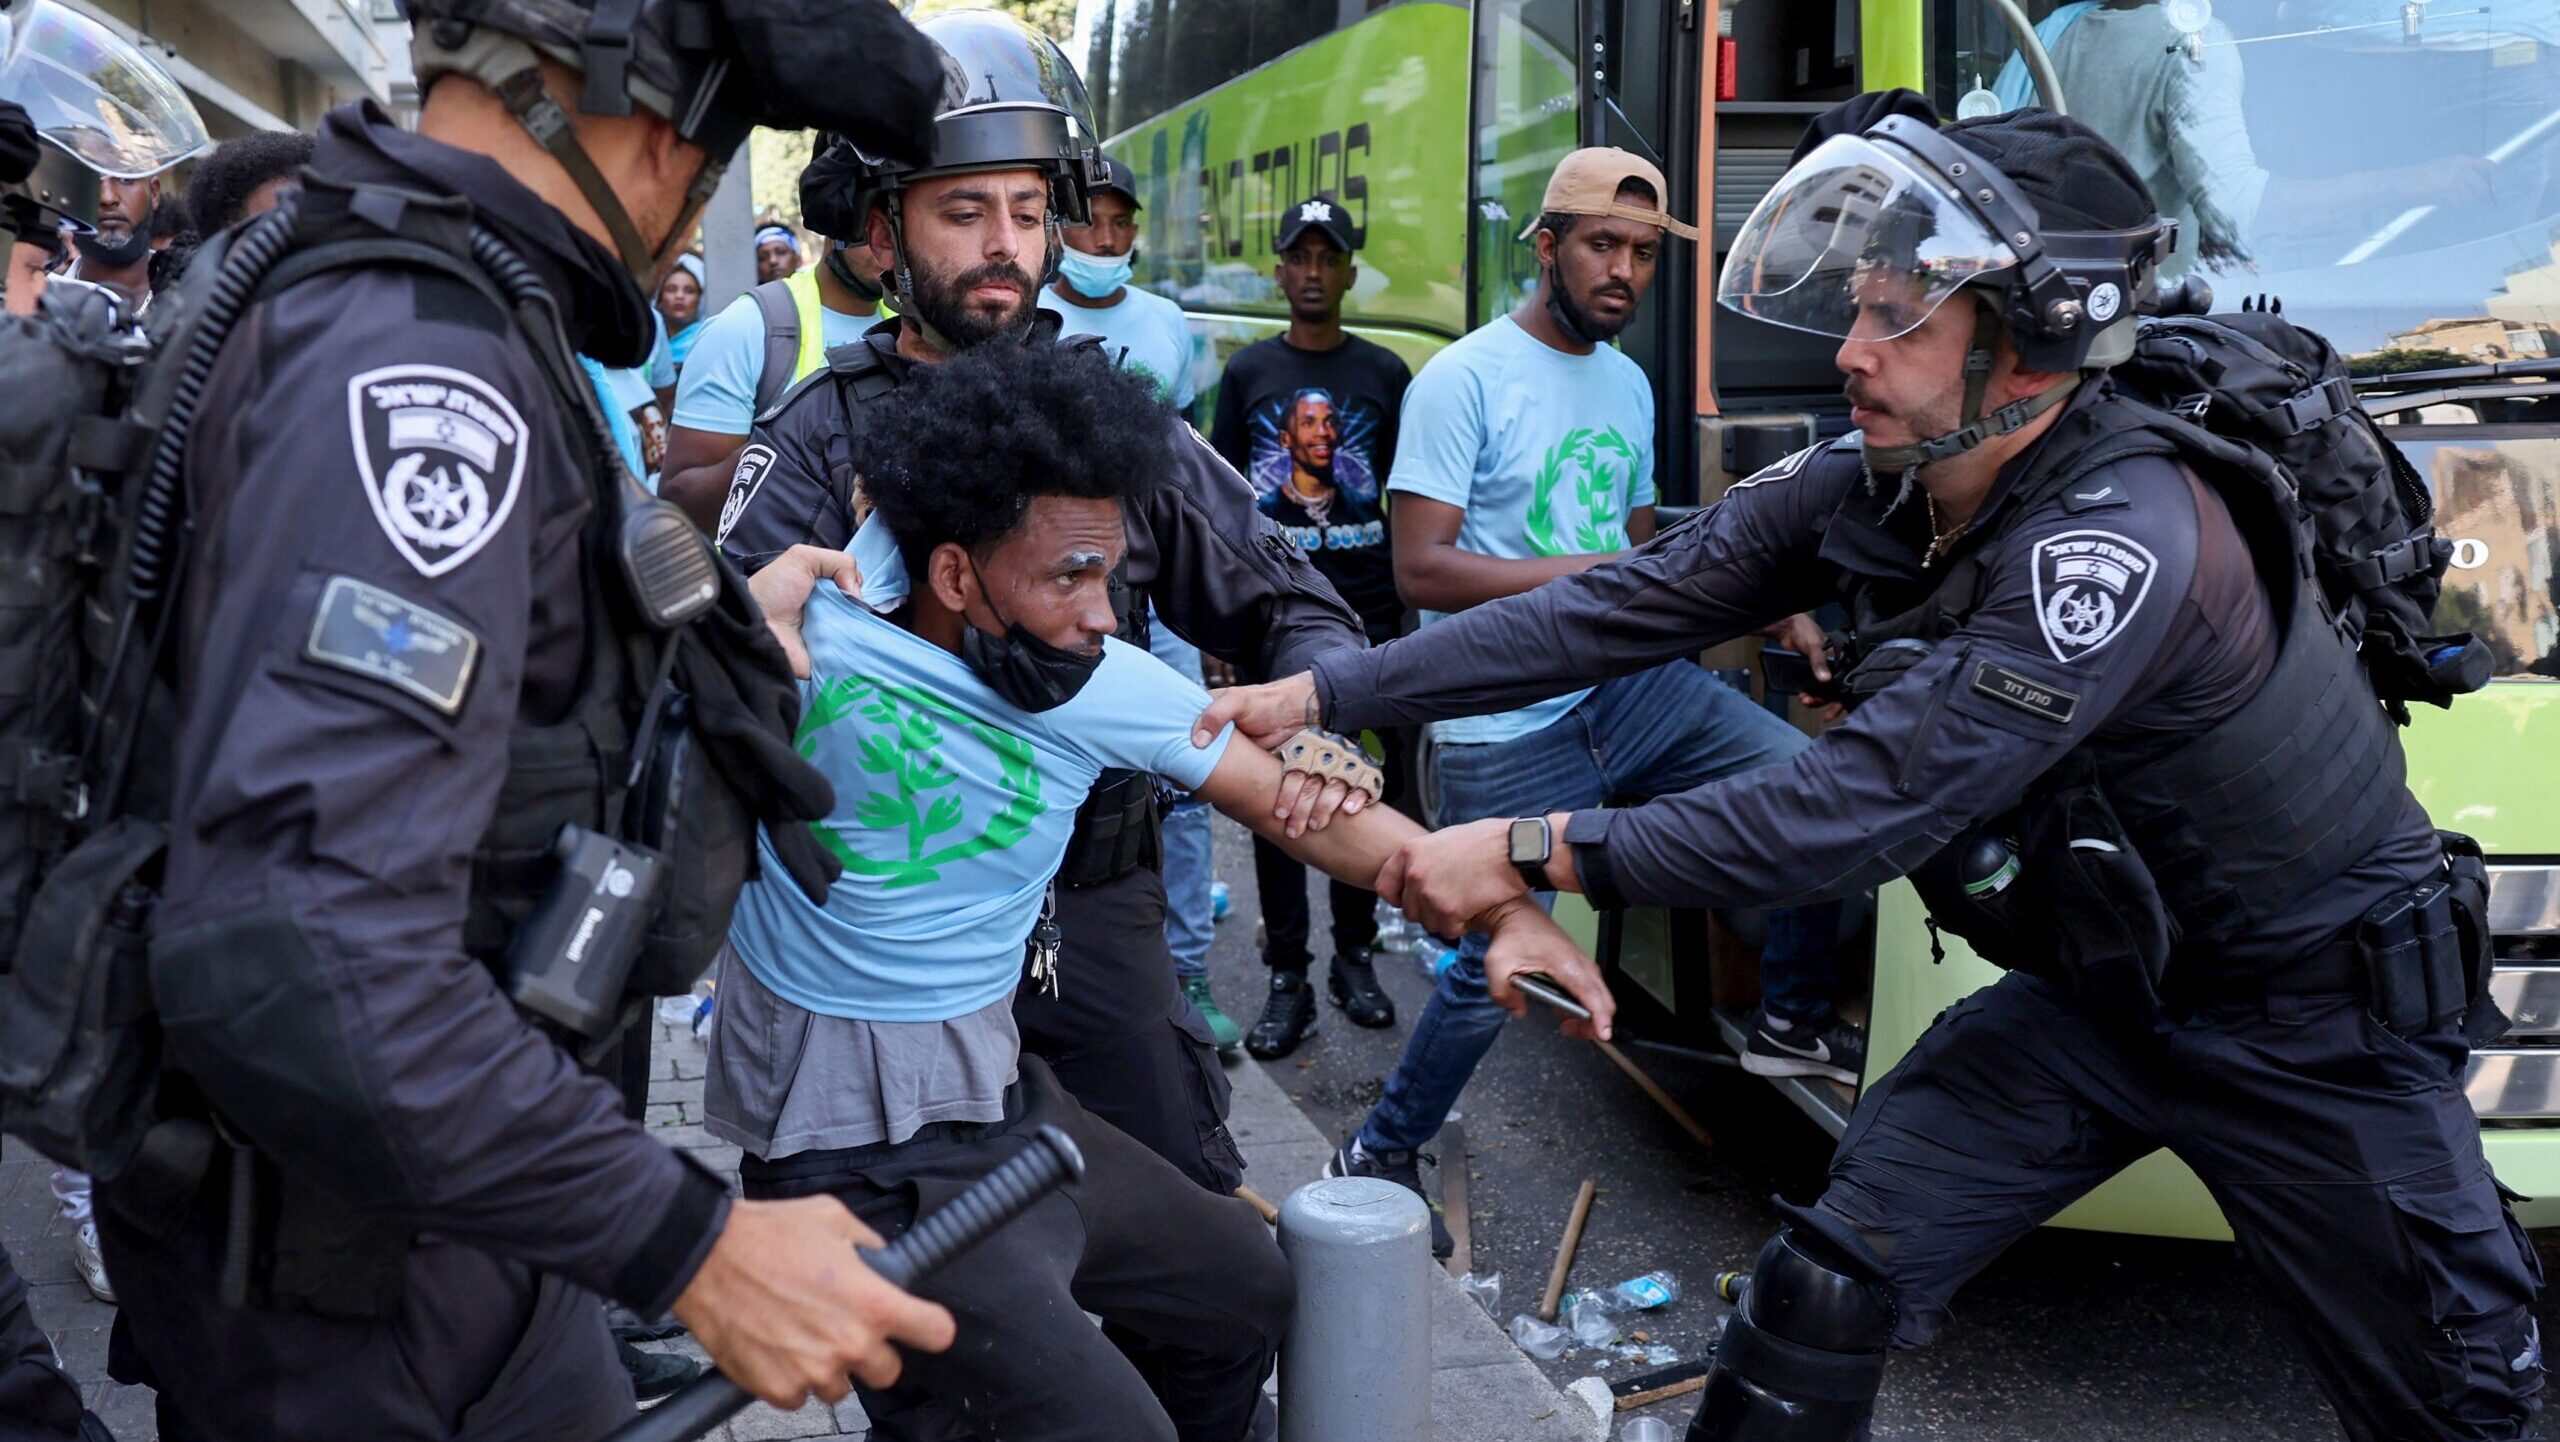 Dozens Injured as Rival Eritrean Groups Clash With Each Other, Police in Tel Aviv